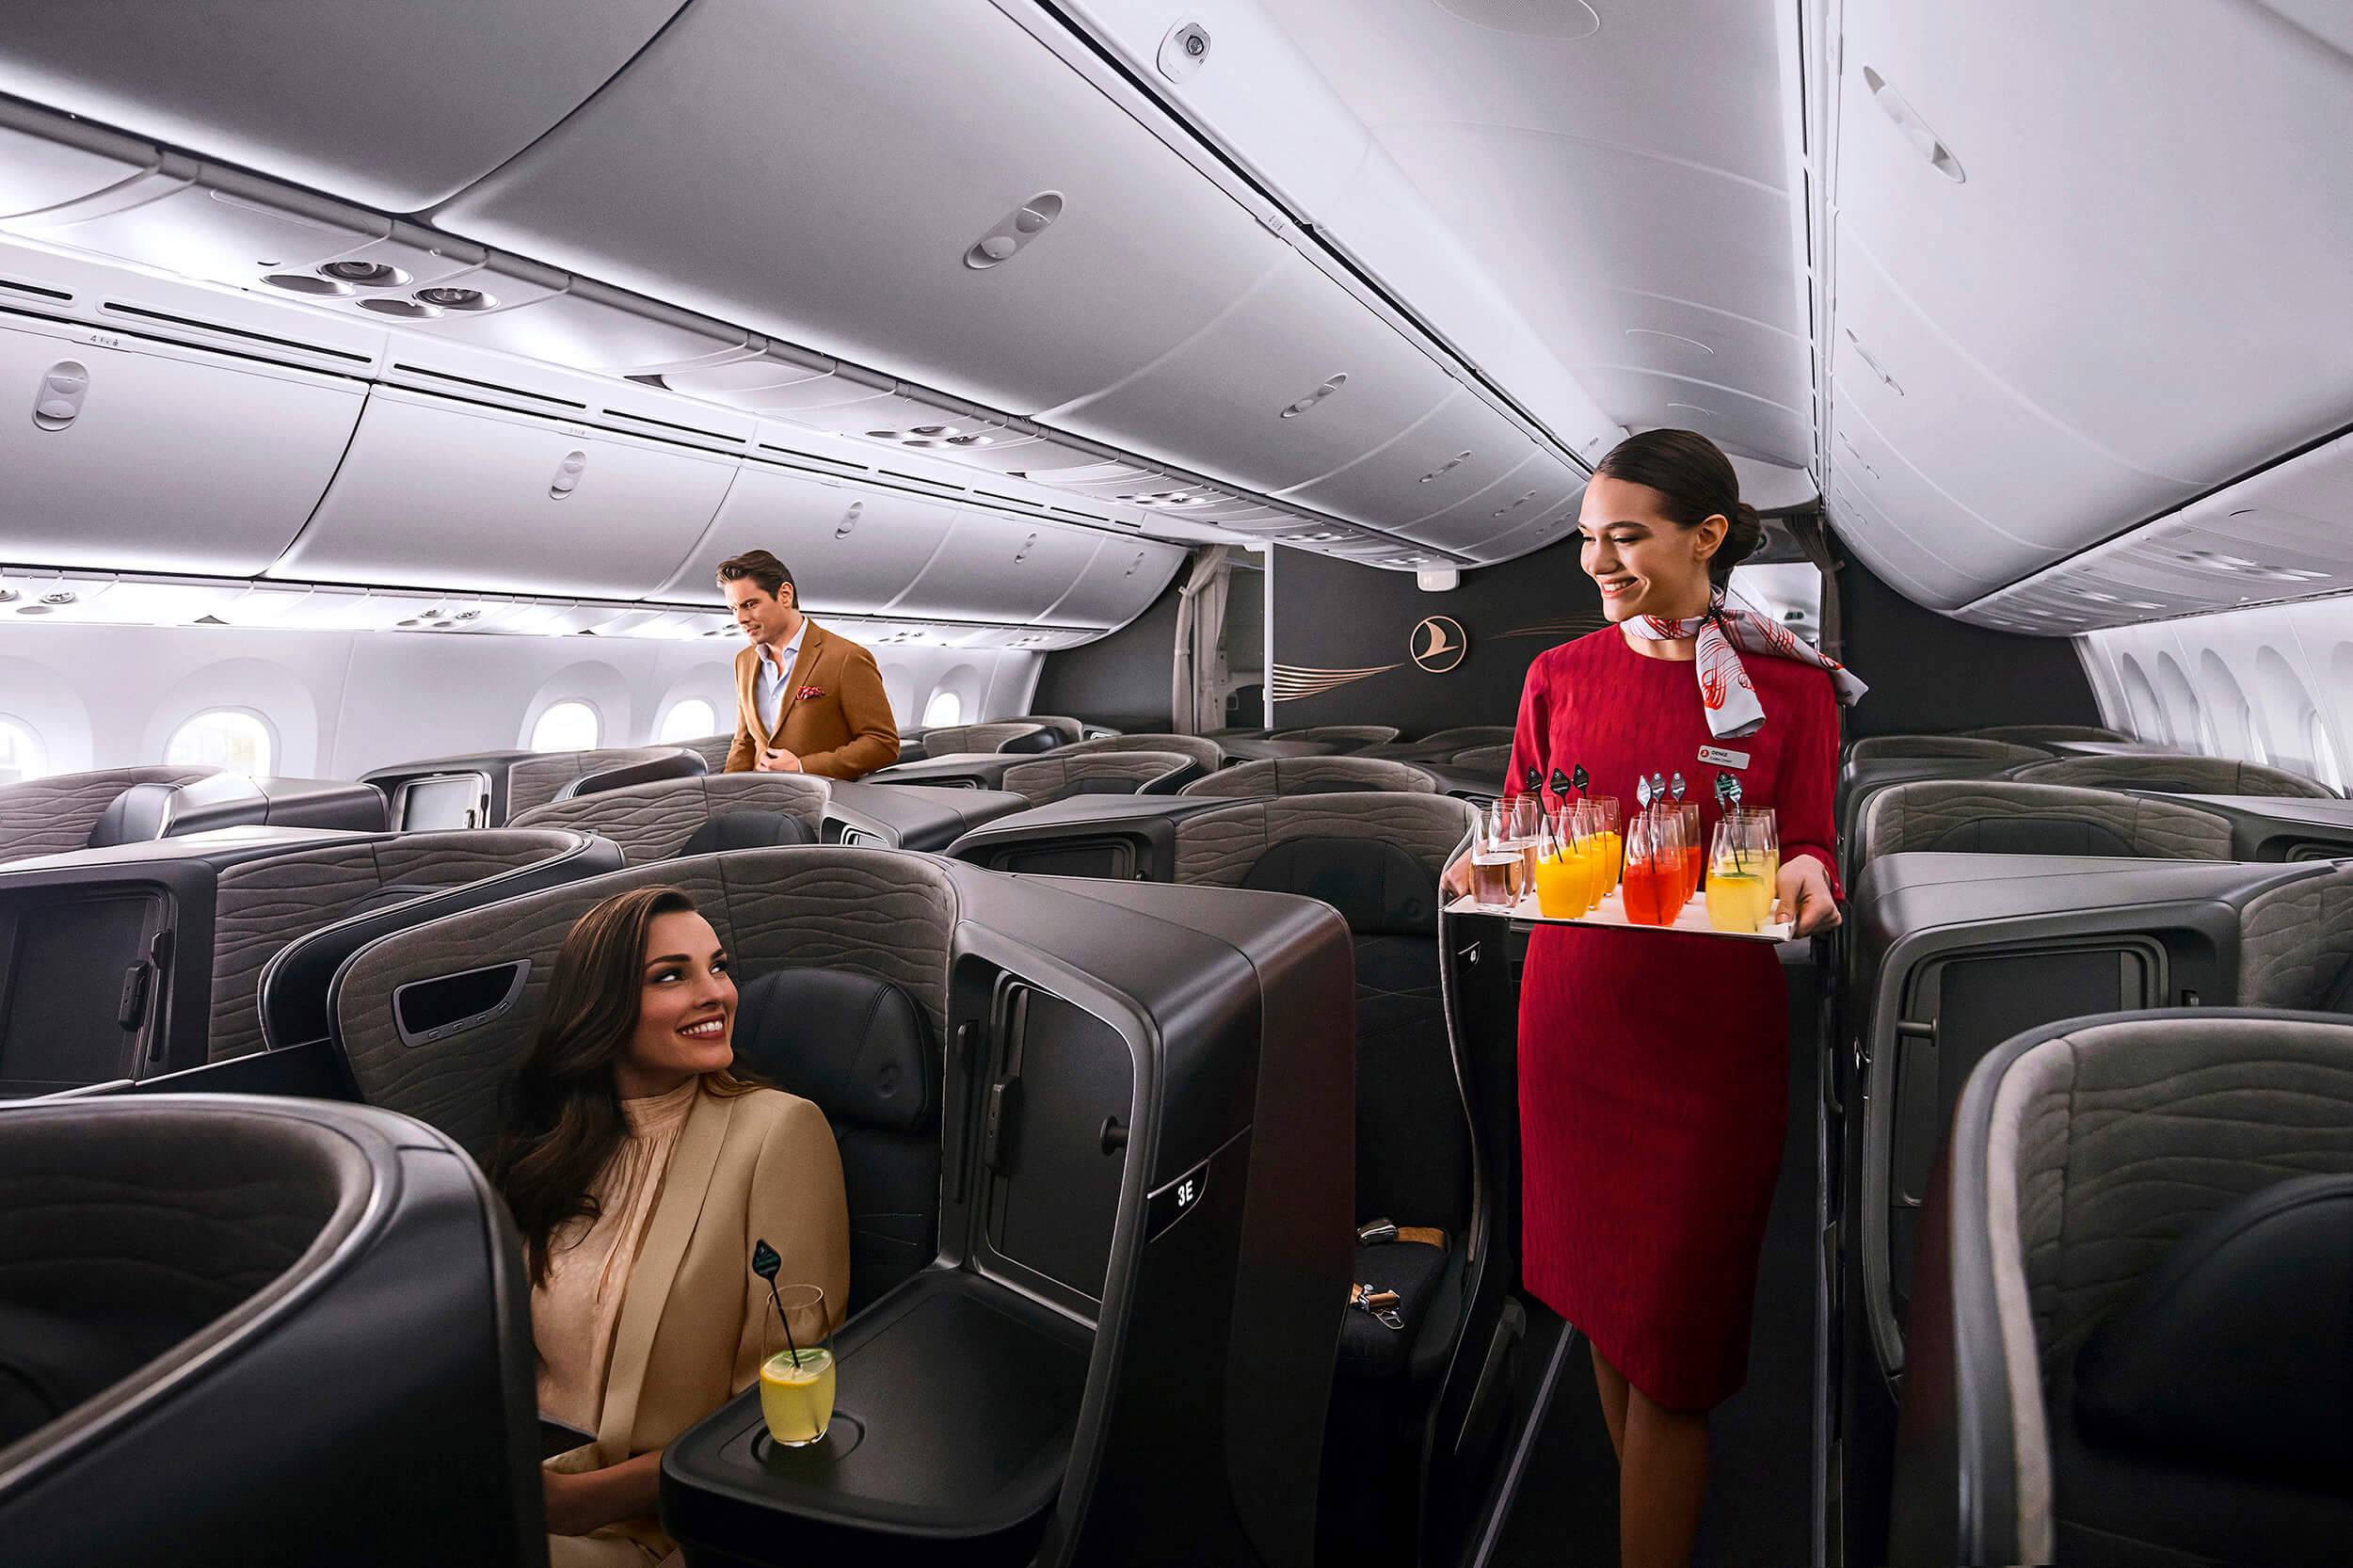 Cabin crew walking down a business class cabin holding a tray filled with drinks, a seated passenger smiles at her. Another passenger is seen standing in the back